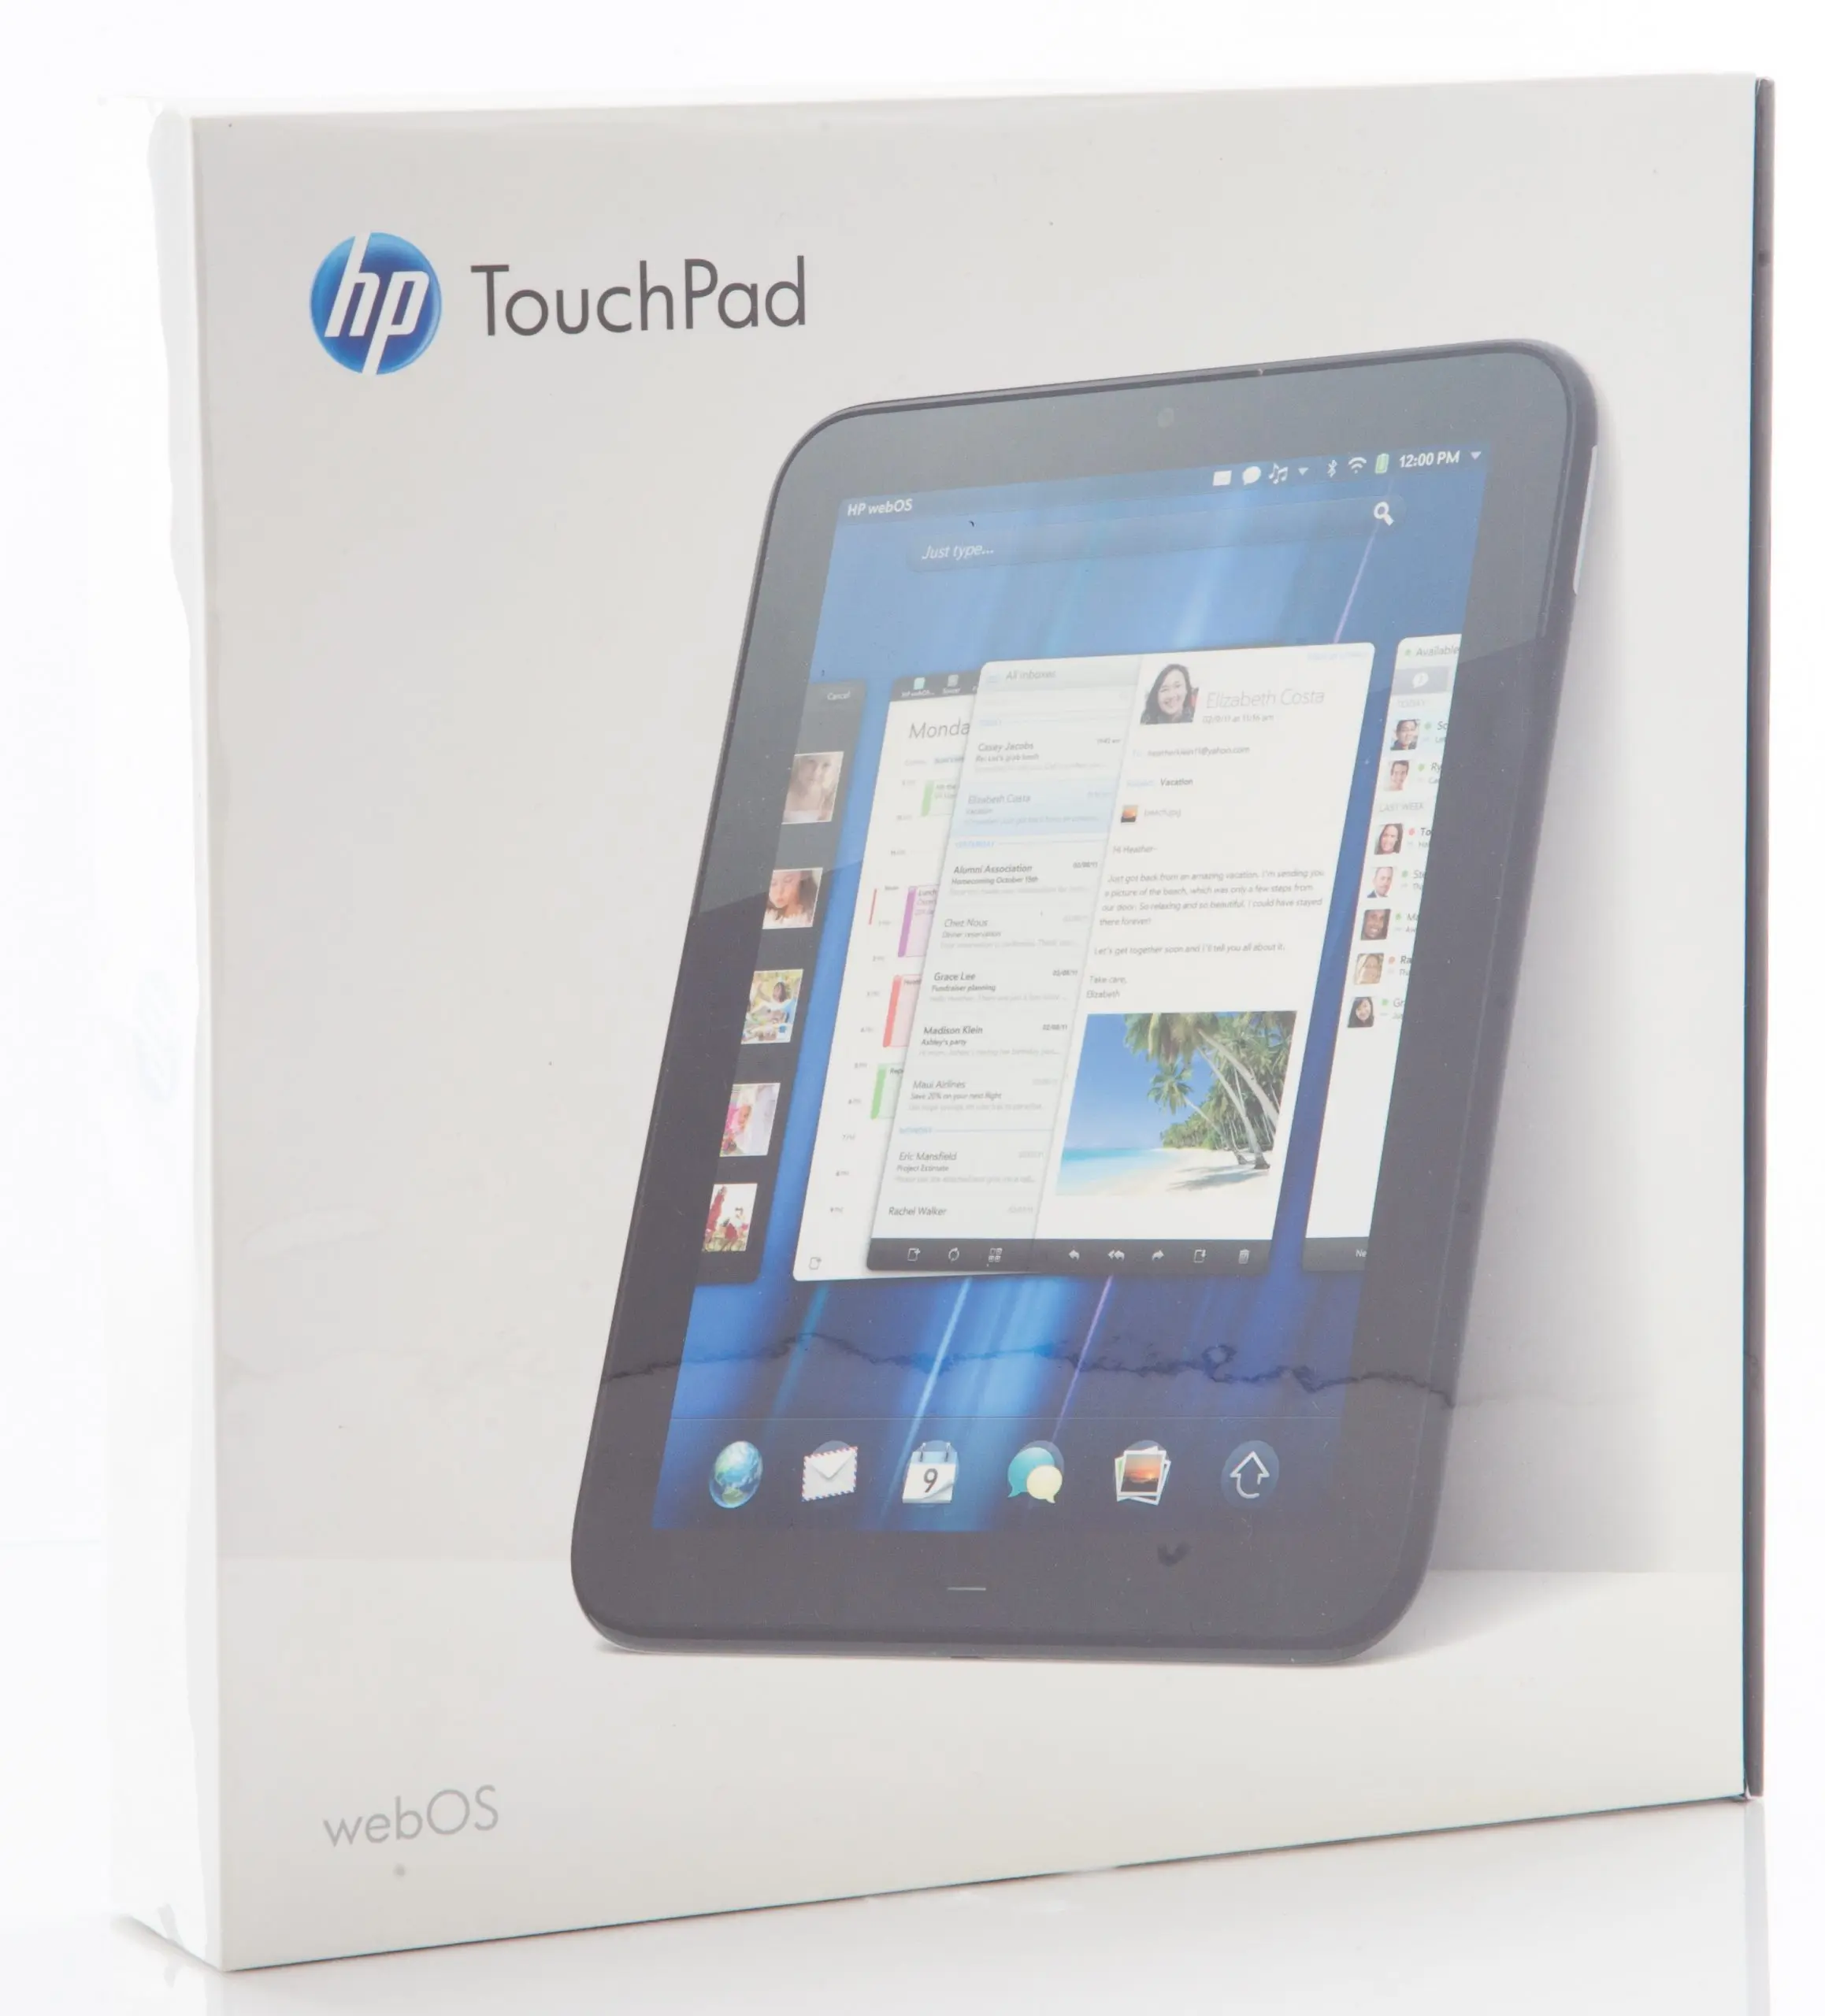 touchpad company hewlett packard - How much did the HP TouchPad cost